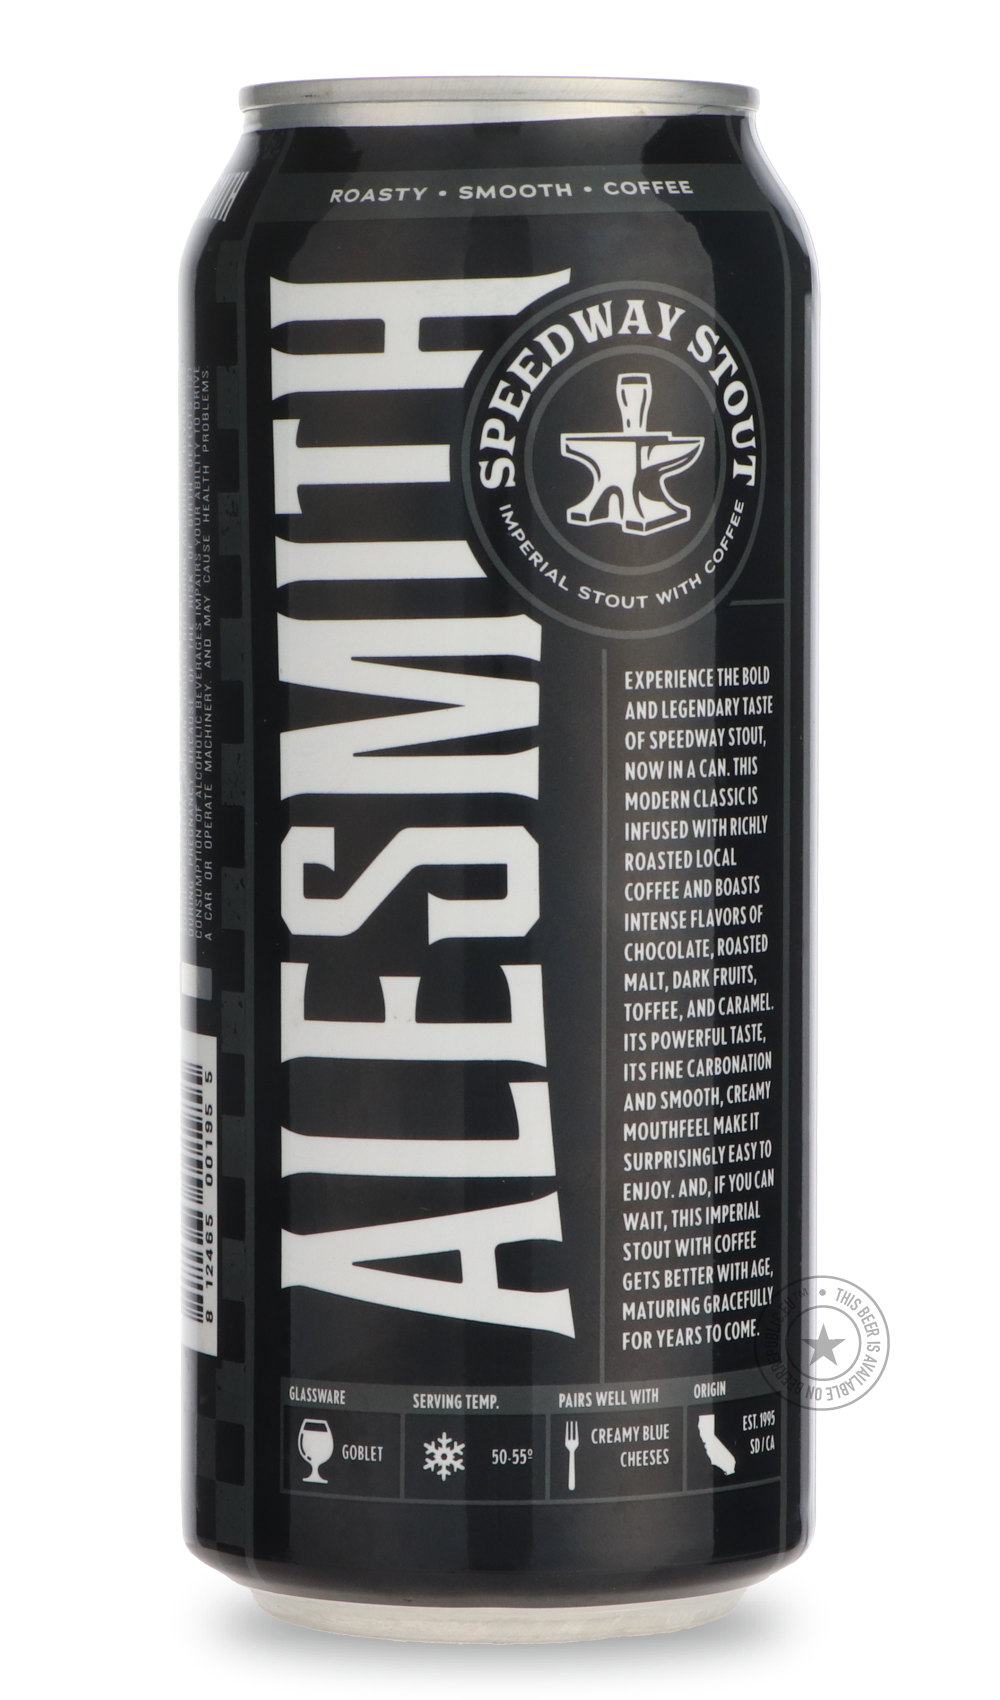 -AleSmith- Speedway Stout-Stout & Porter- Only @ Beer Republic - The best online beer store for American & Canadian craft beer - Buy beer online from the USA and Canada - Bier online kopen - Amerikaans bier kopen - Craft beer store - Craft beer kopen - Amerikanisch bier kaufen - Bier online kaufen - Acheter biere online - IPA - Stout - Porter - New England IPA - Hazy IPA - Imperial Stout - Barrel Aged - Barrel Aged Imperial Stout - Brown - Dark beer - Blond - Blonde - Pilsner - Lager - Wheat - Weizen - Ambe